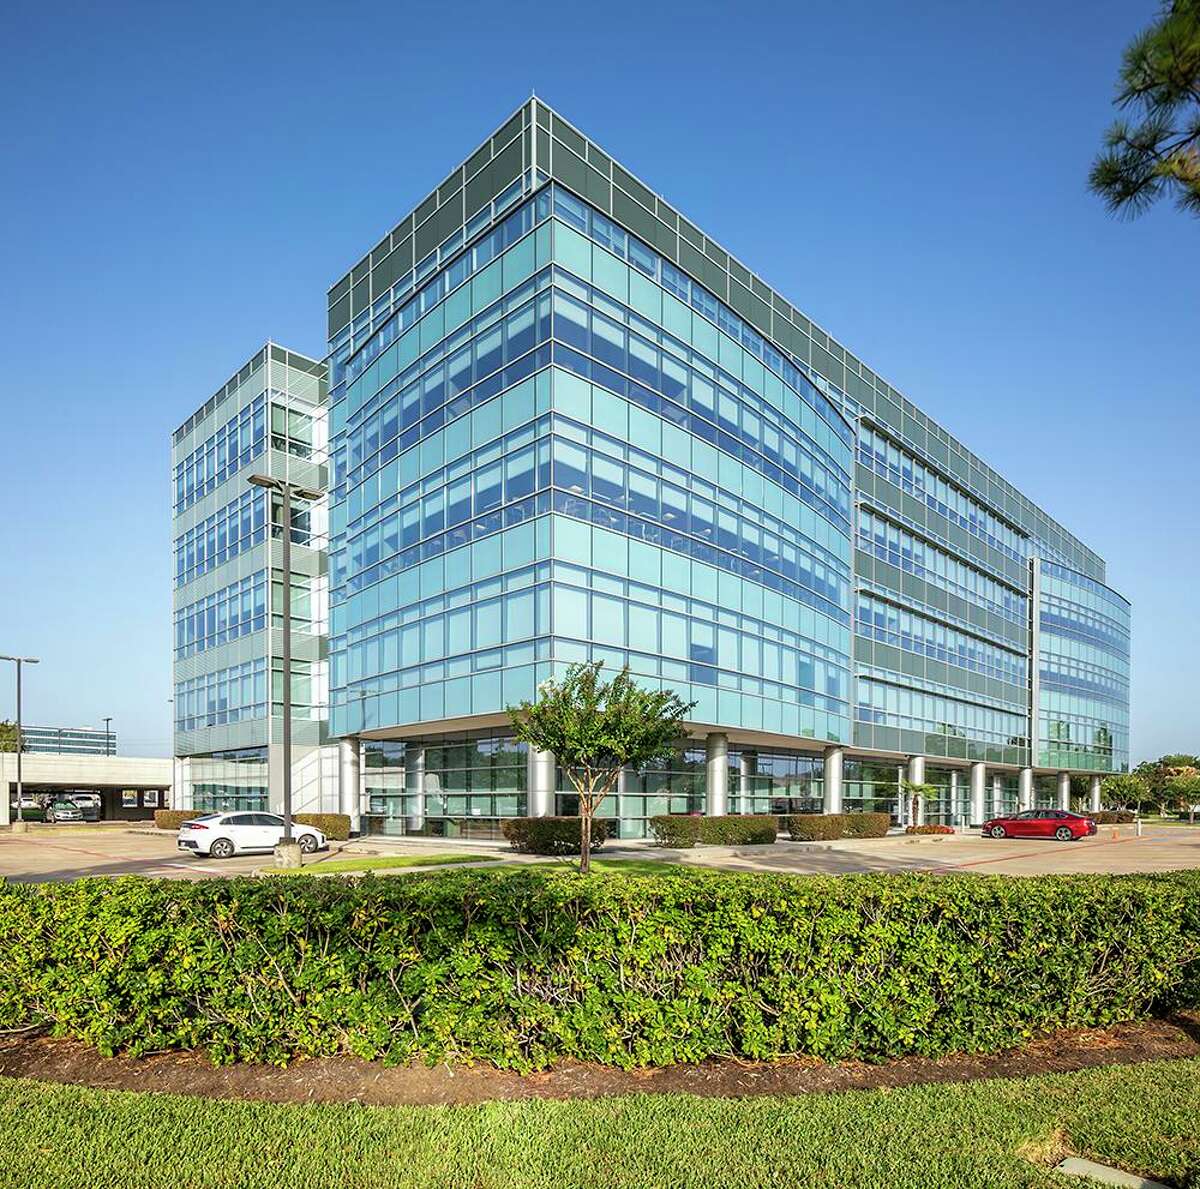 Real estate transactions: FedEx Ground inks big lease in north Houston